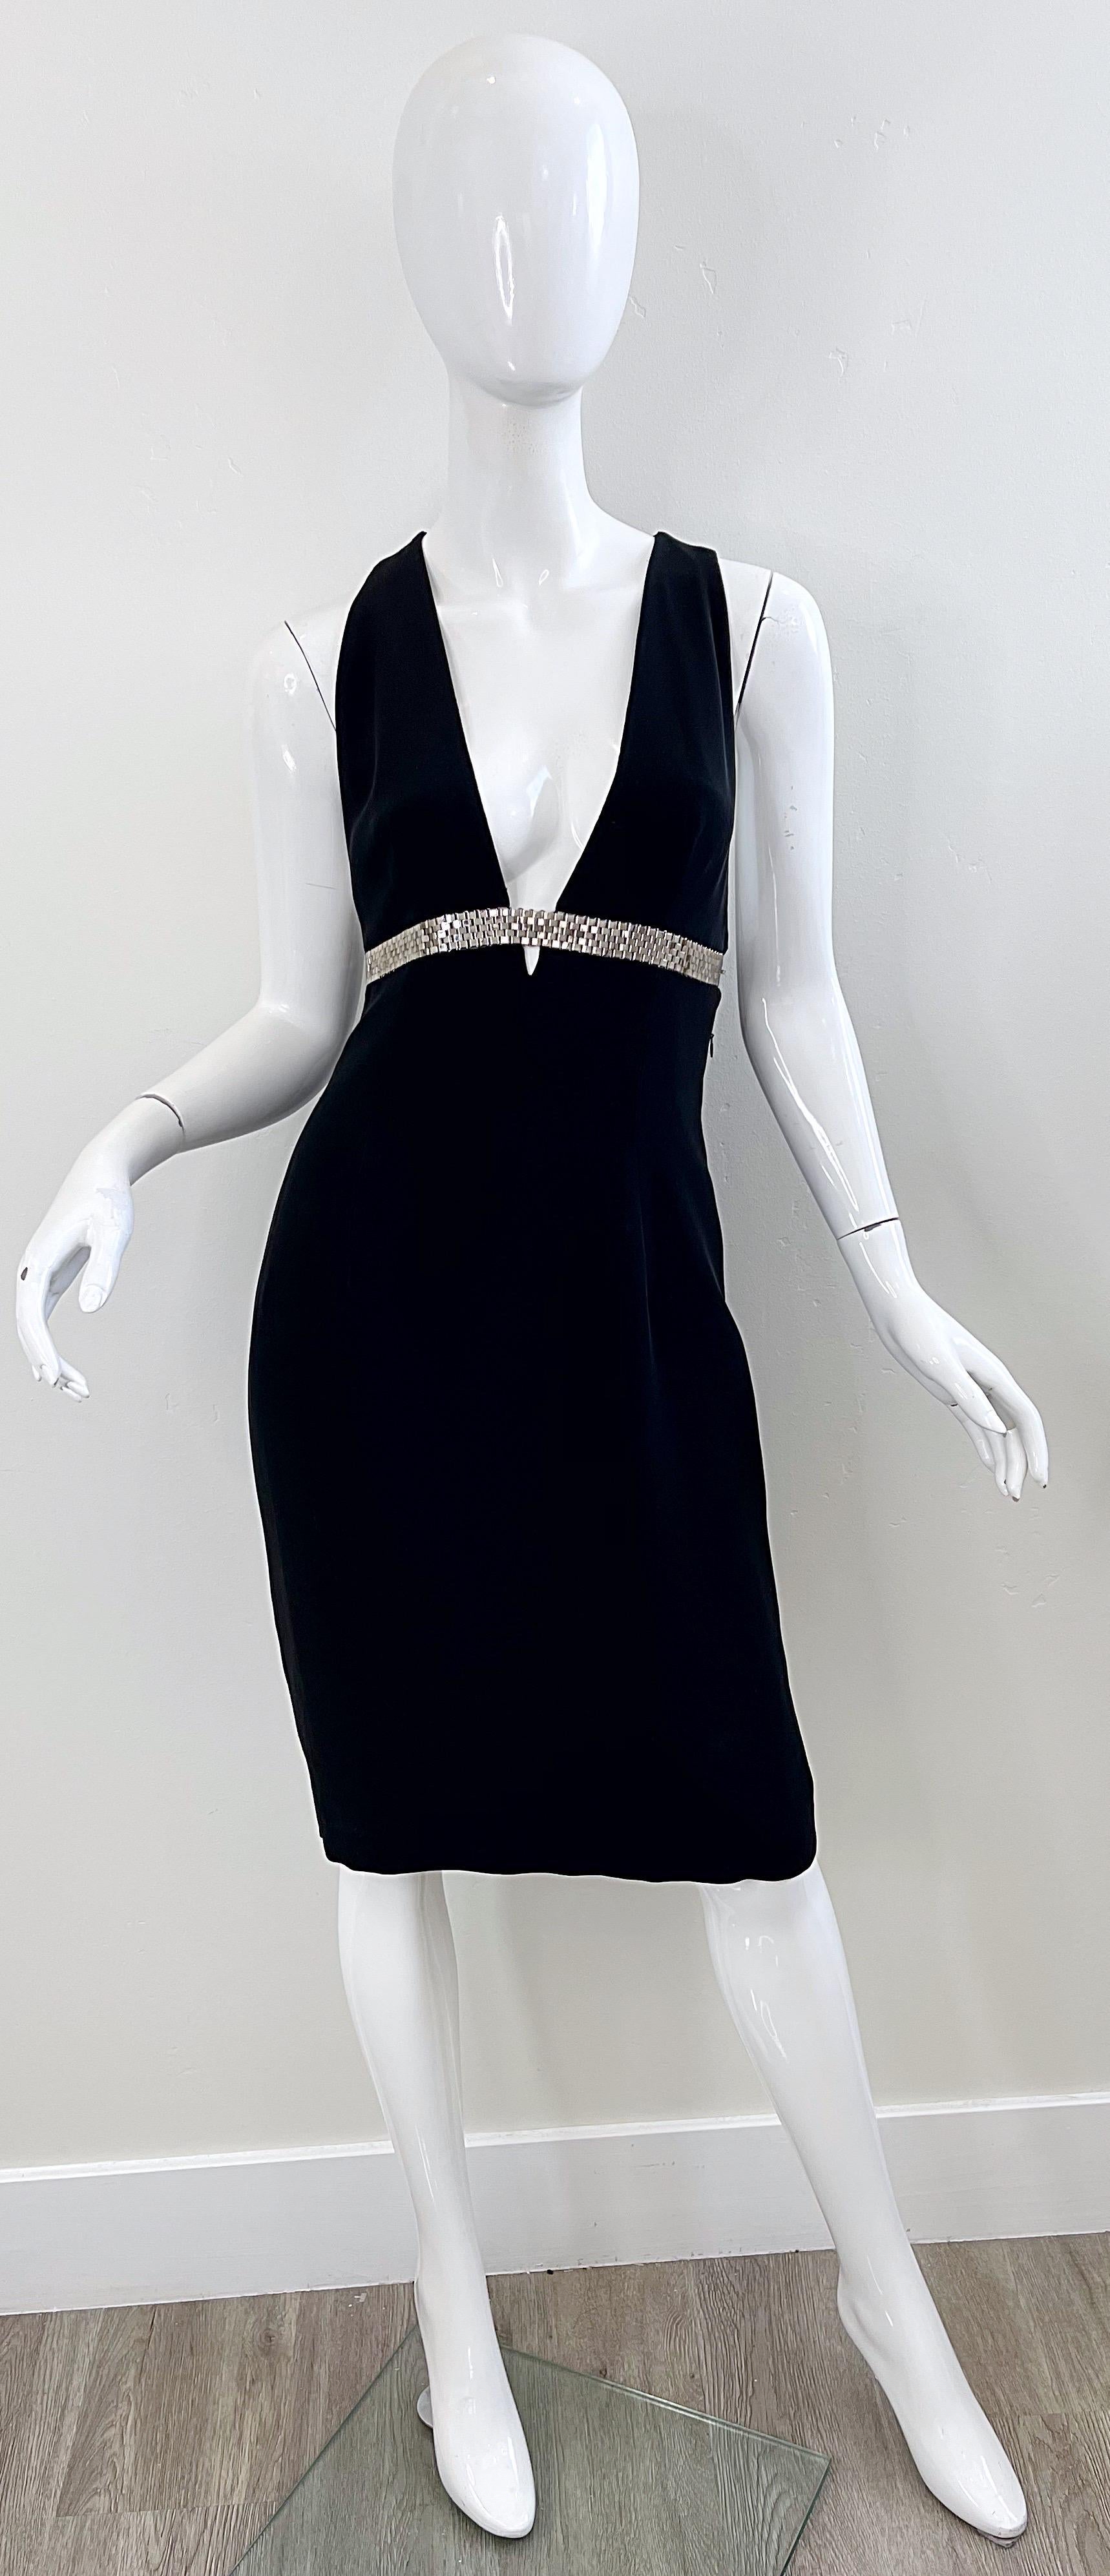 Givenchy Ricardo Tisci Size 40 / 6 - 8 Black Watch Link Silk Plunging Dress In Excellent Condition For Sale In San Diego, CA